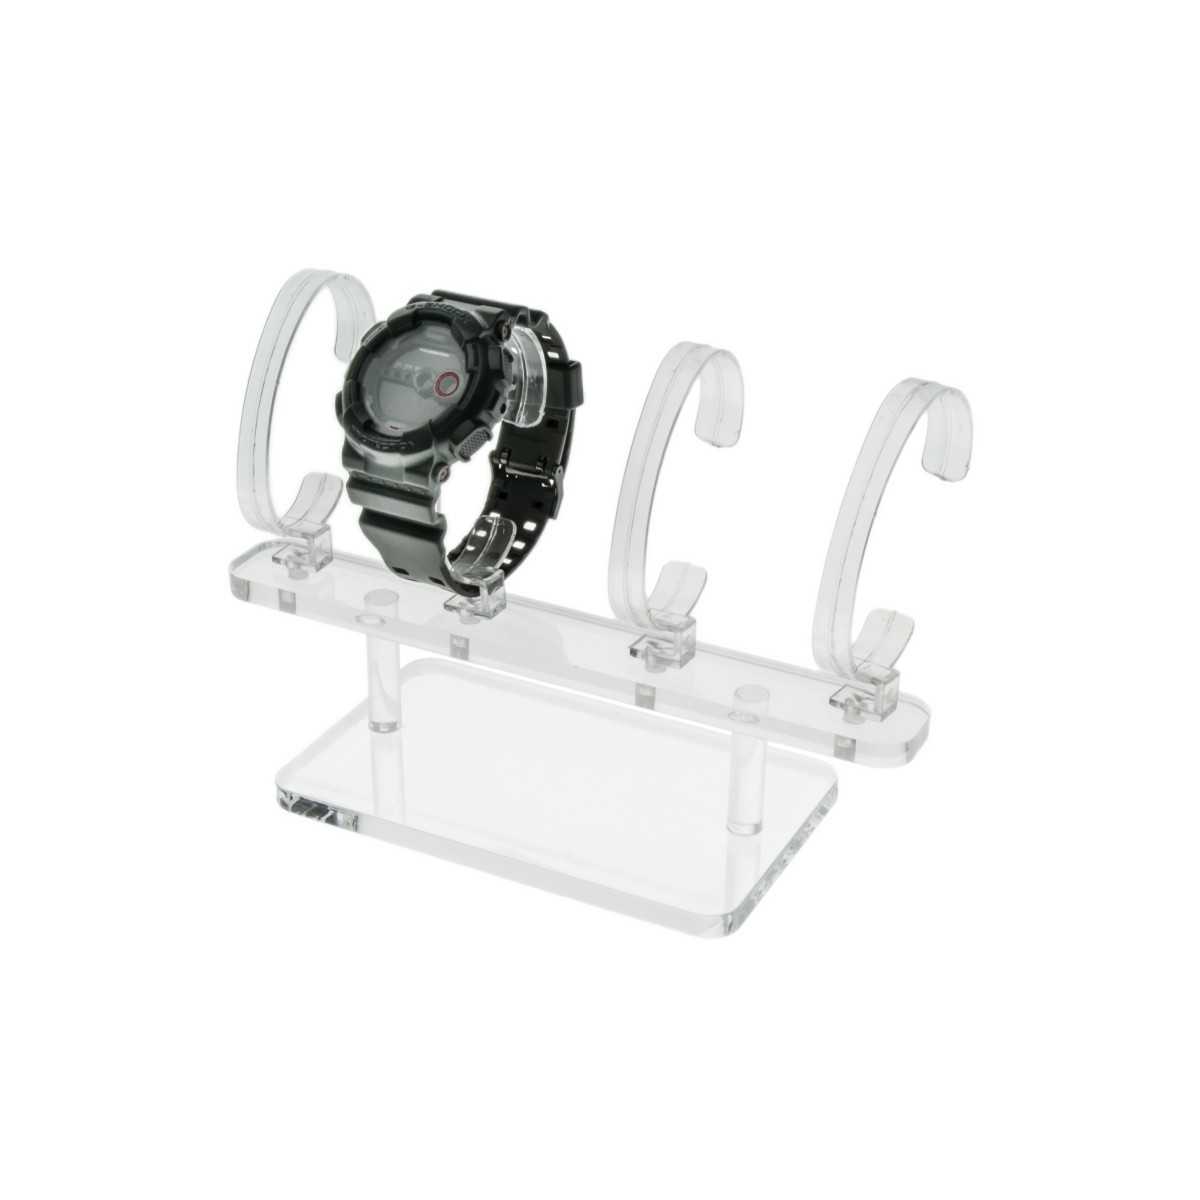 Clear wrist watch display holder stand, for 4 bracelet watches